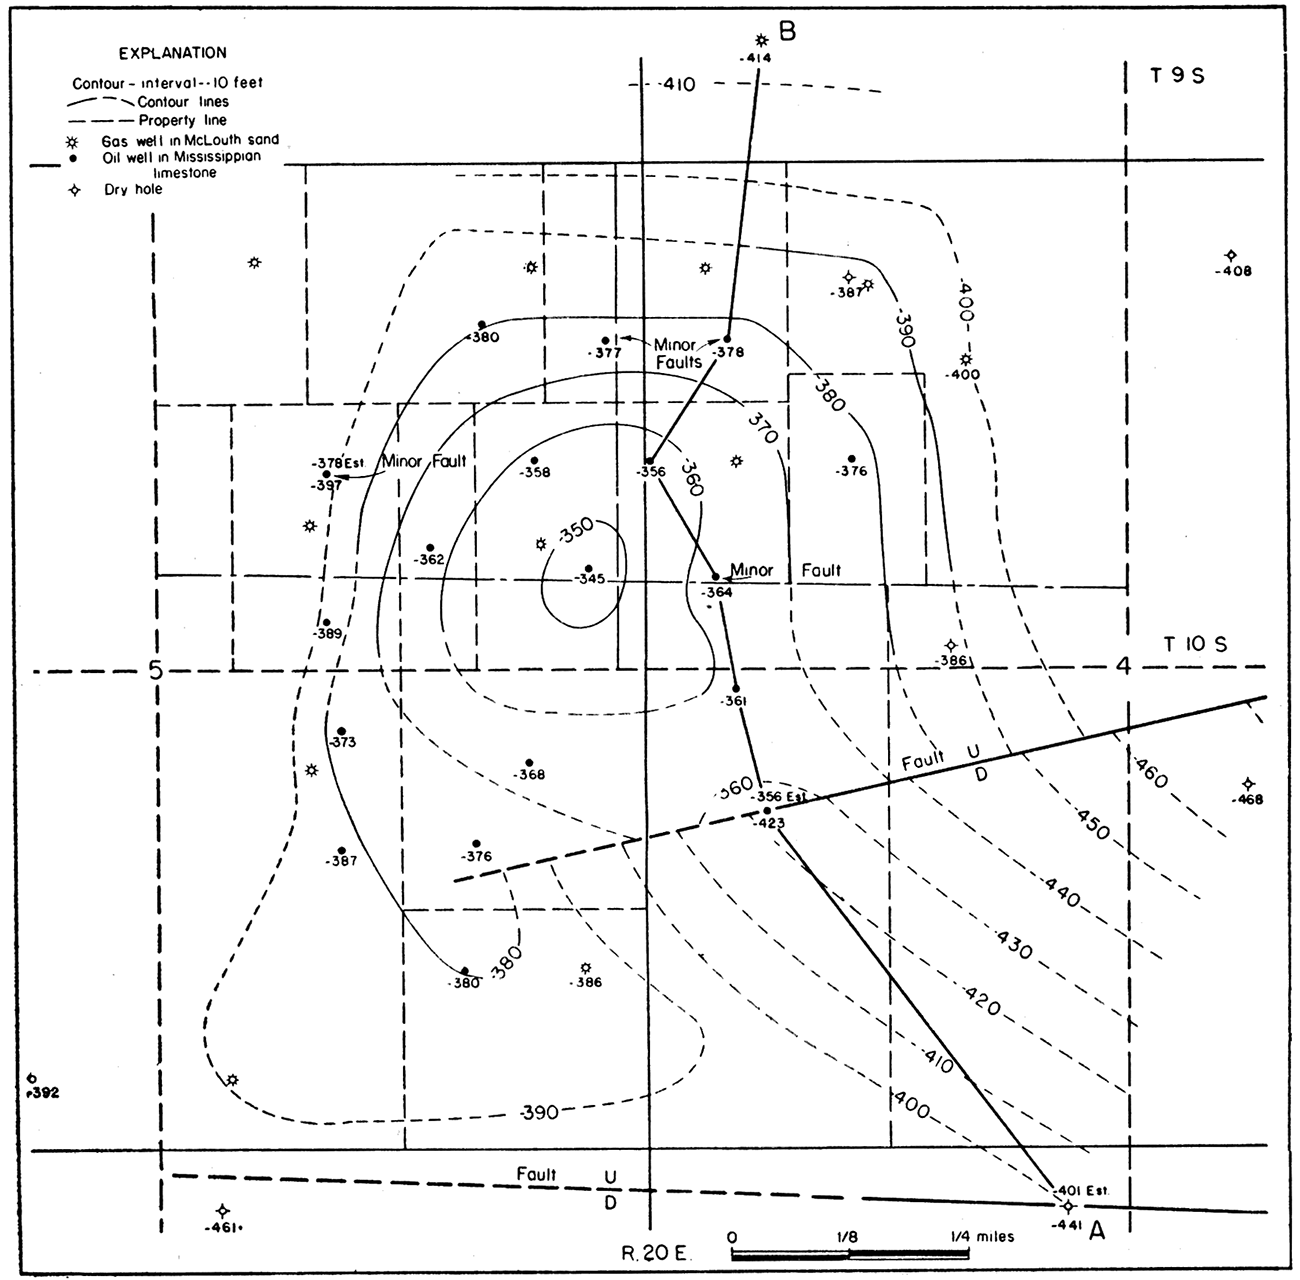 Map showing structure of the McLouth pool contoured on the top of the Warsaw limestone.